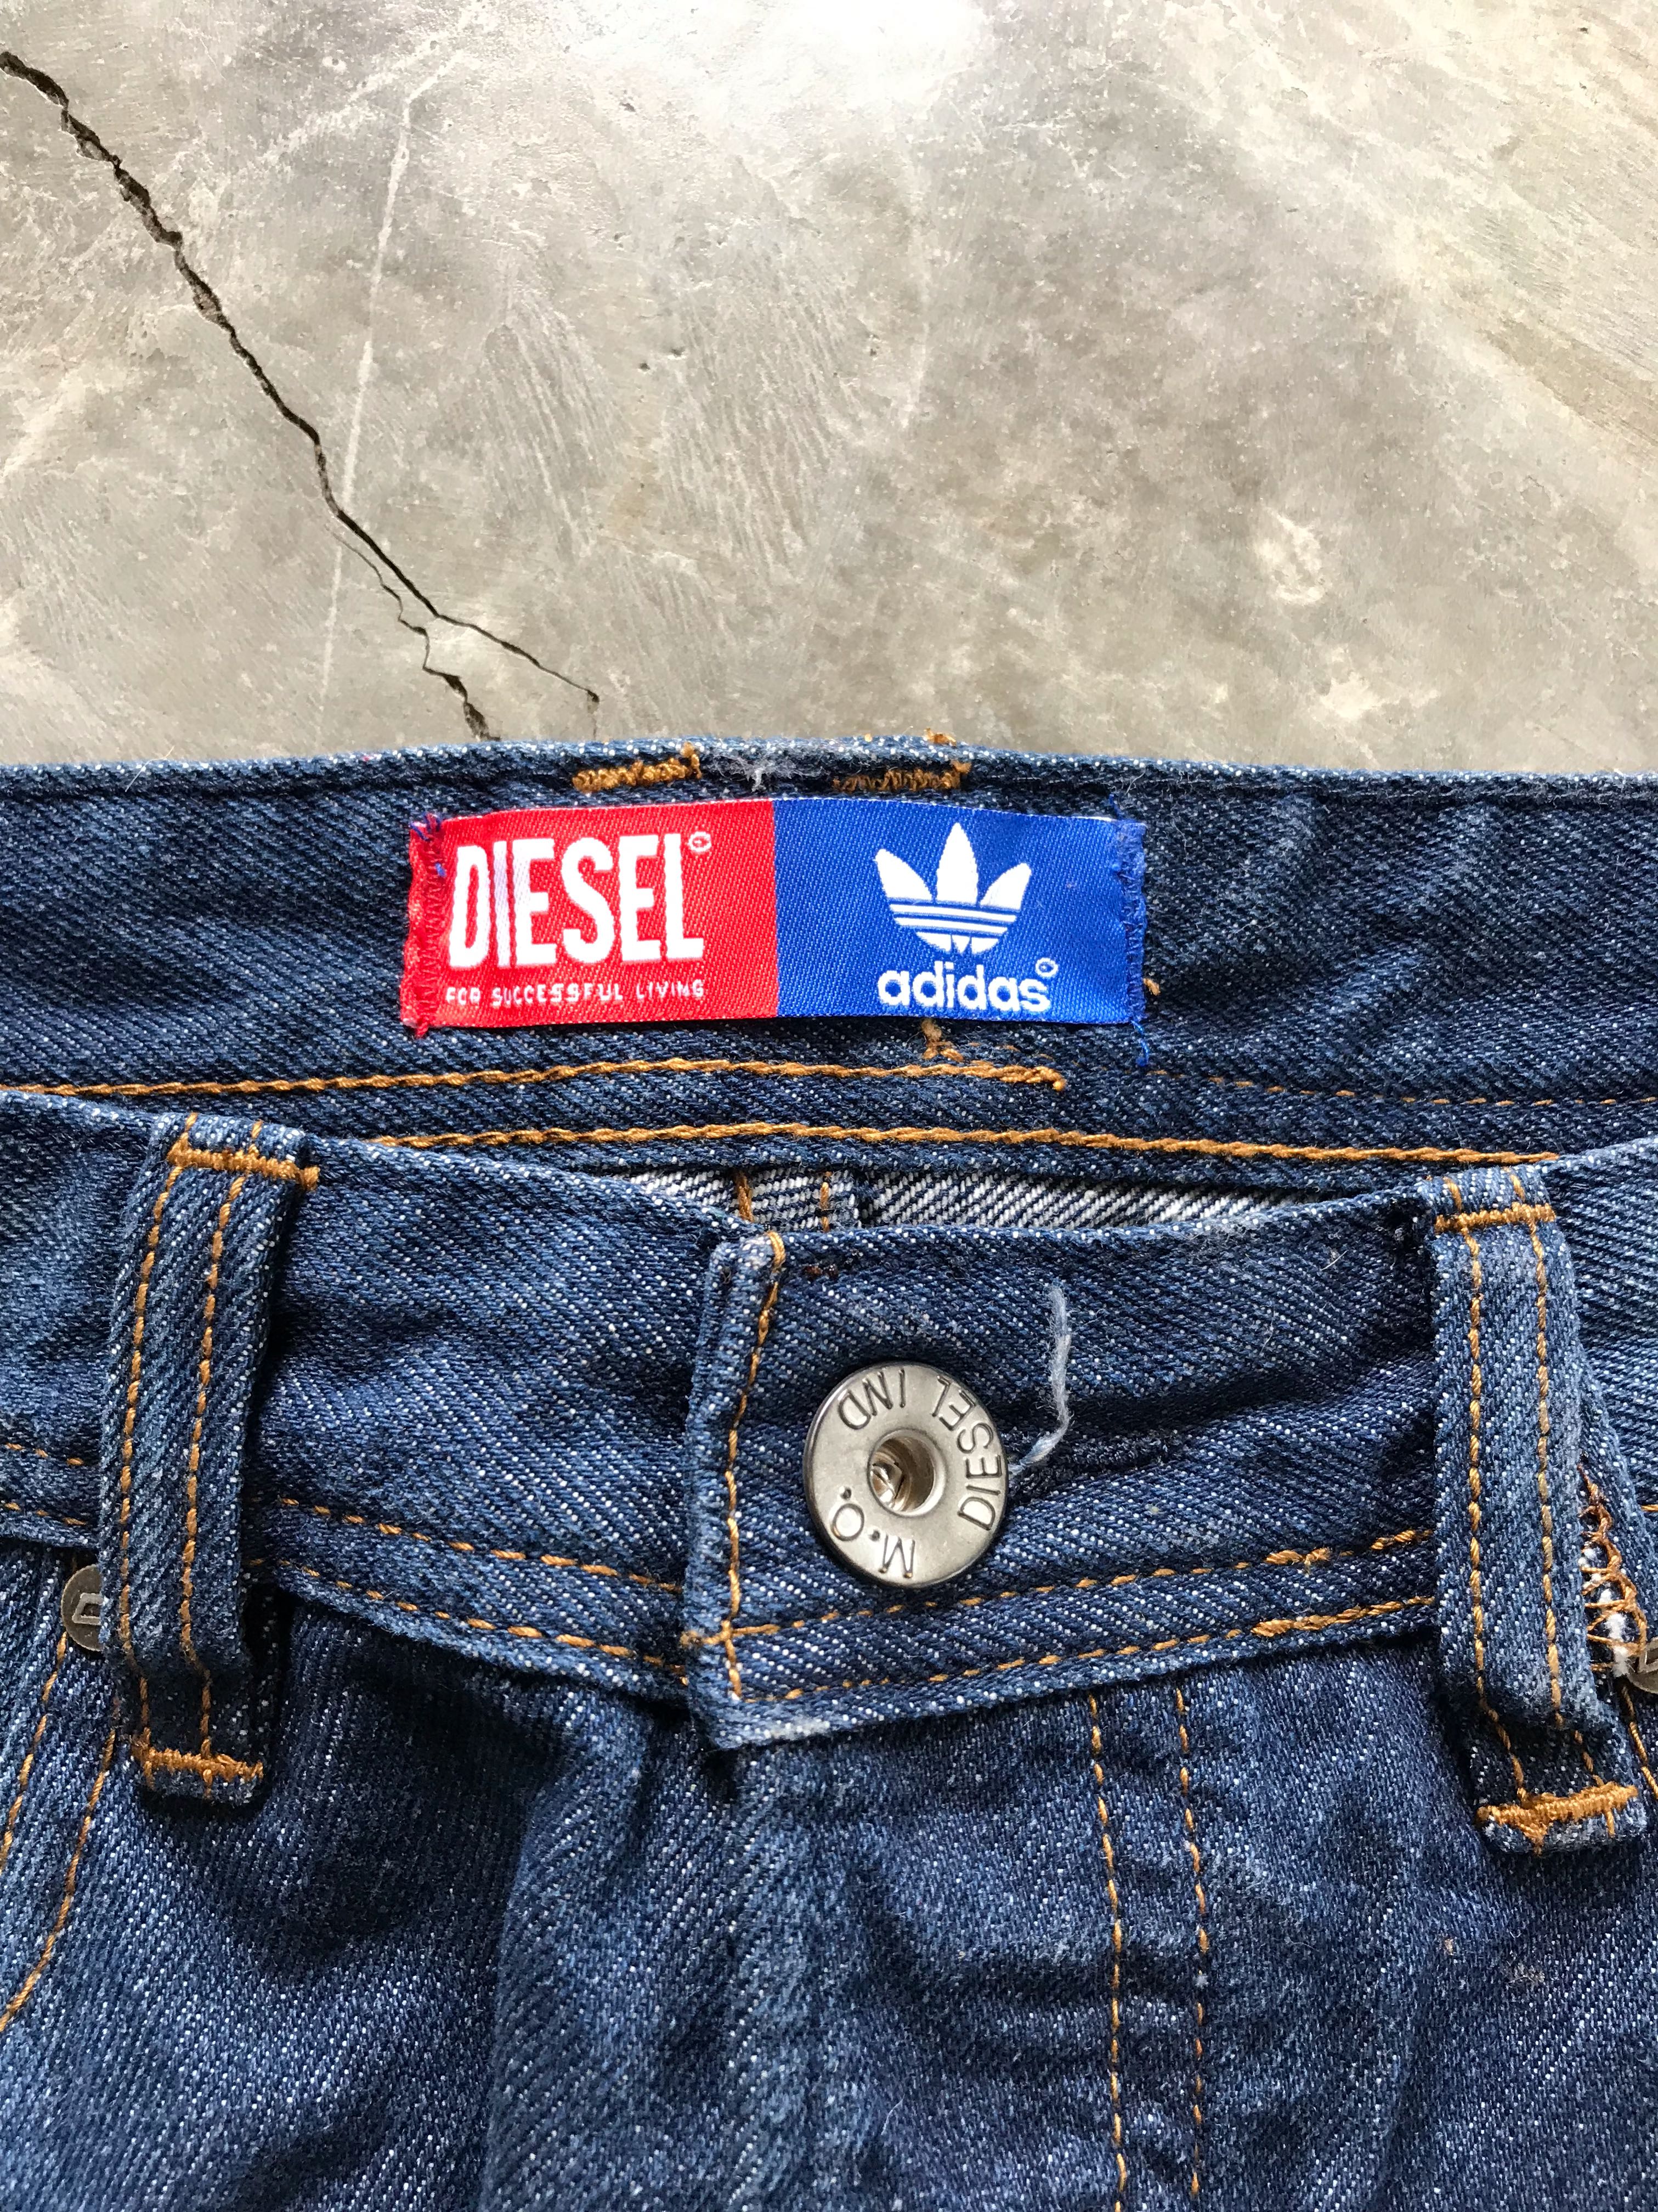 Hermana ramo de flores Colonos Diesel x Adidas denim pants made in Italy, Men's Fashion, Bottoms, Trousers  on Carousell